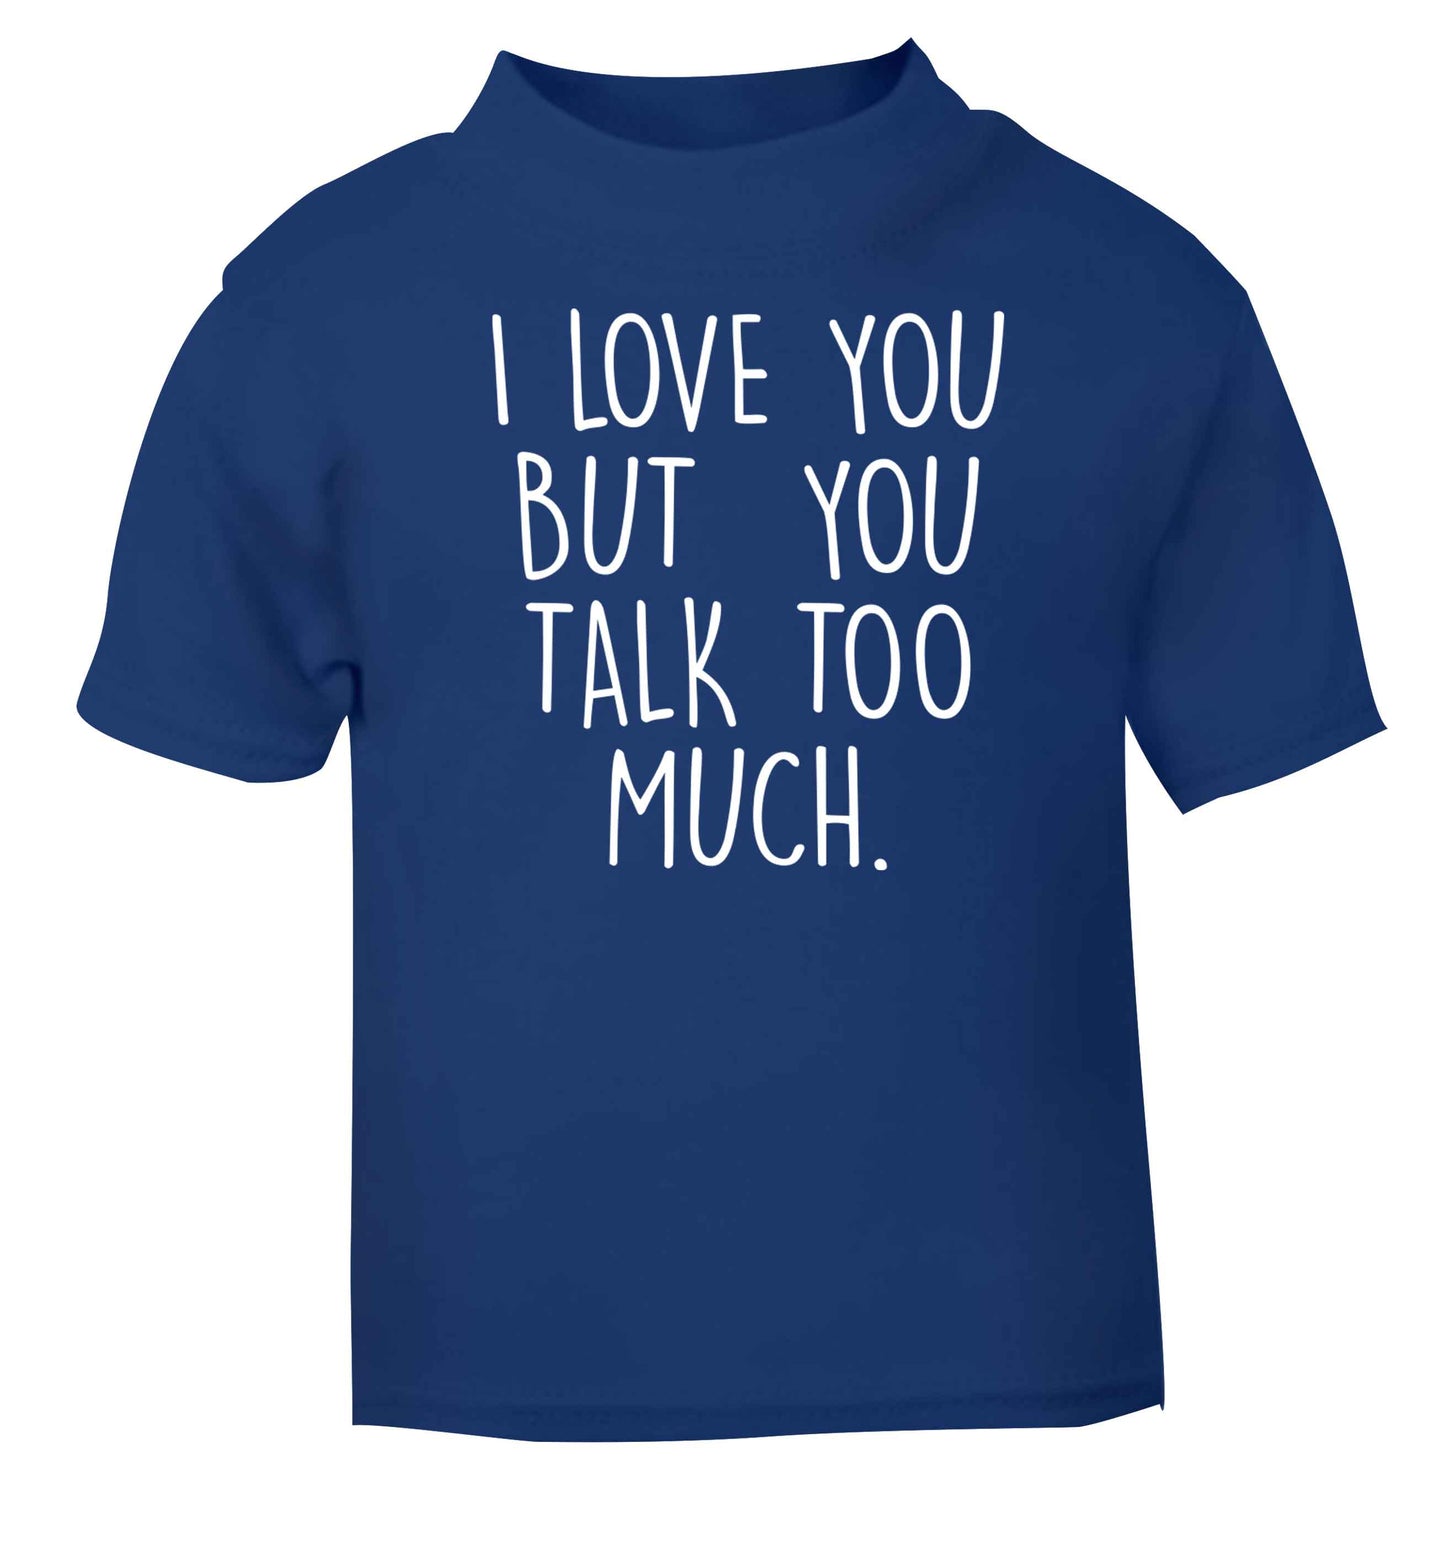 I love you but you talk too much blue baby toddler Tshirt 2 Years